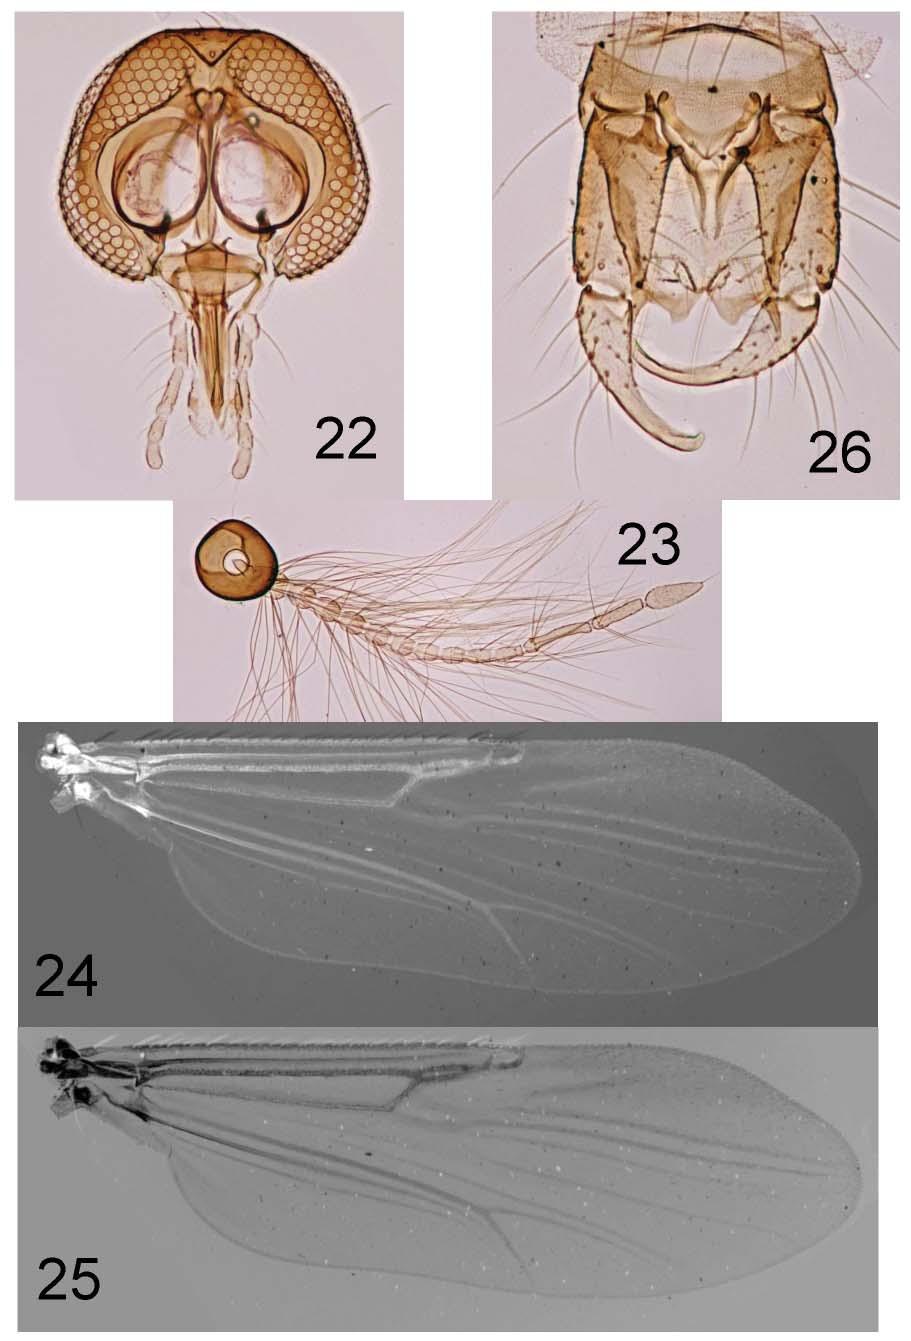 A REVISION OF THE BITING MIDGES INSECTA MUNDI 0441, August 2015 21 Figures 22 26.